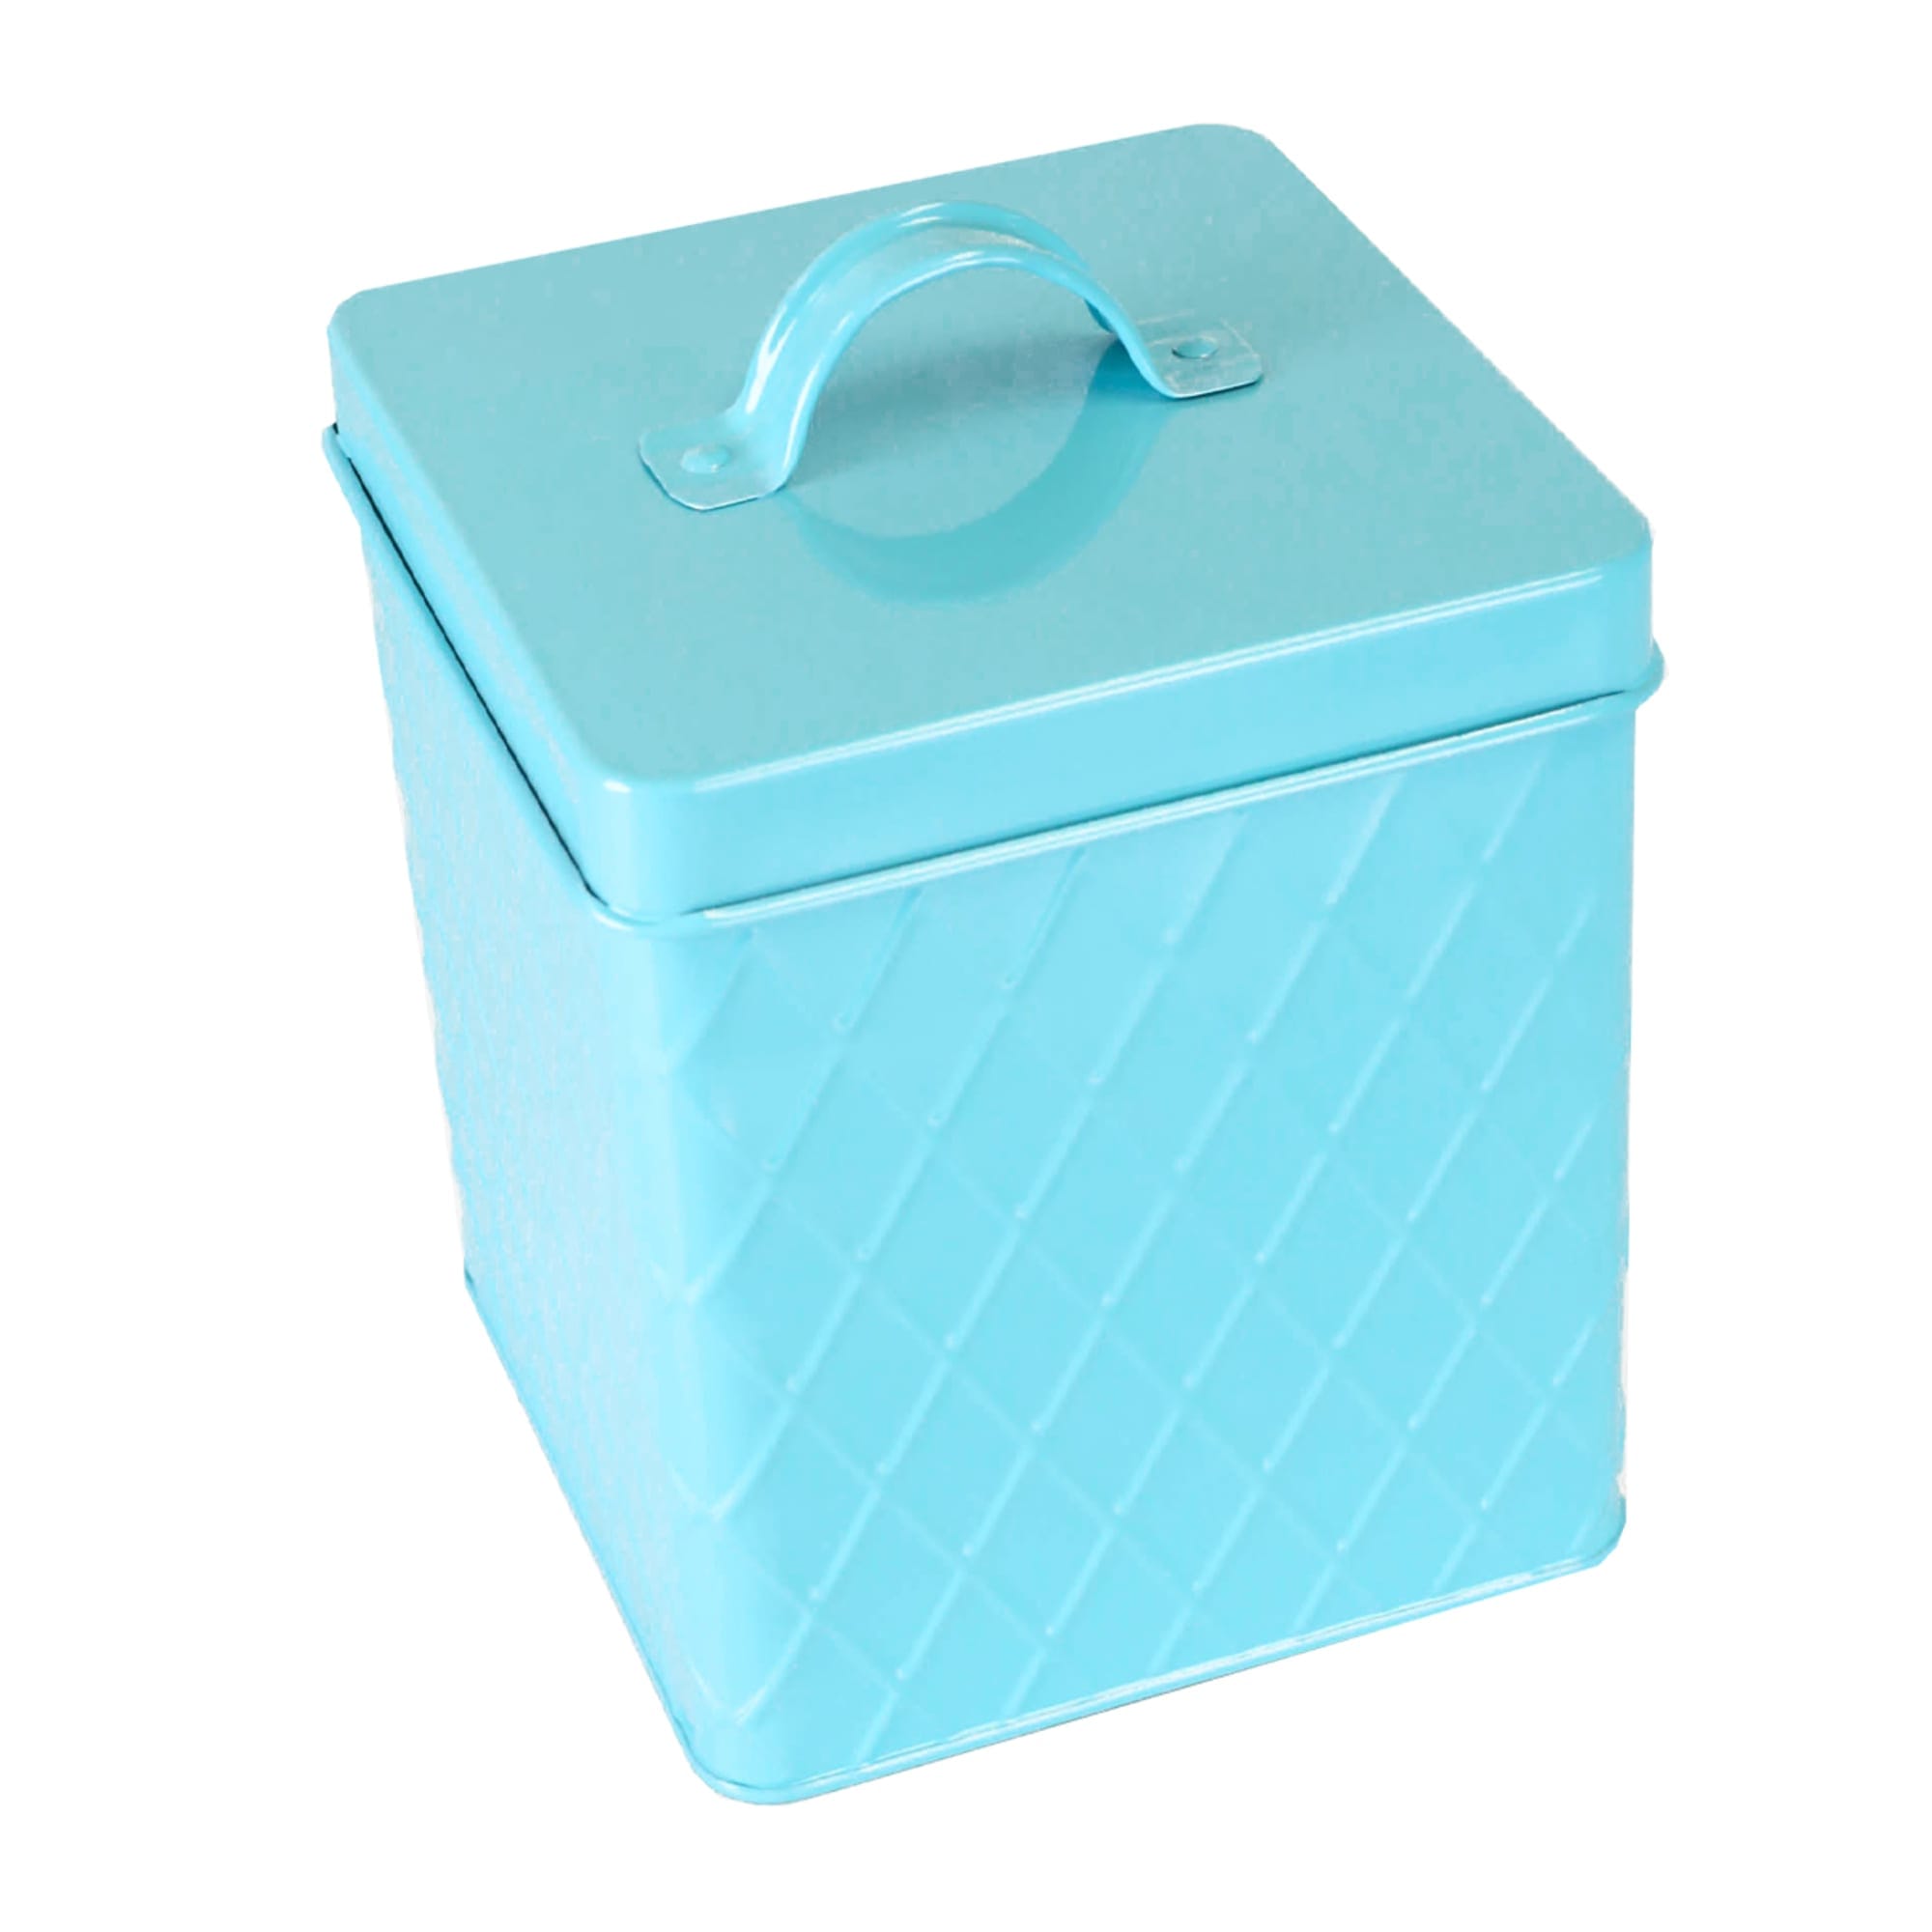 Home Basics Trellis Collection Small Tin Canister, Turquoise $5.00 EACH, CASE PACK OF 12